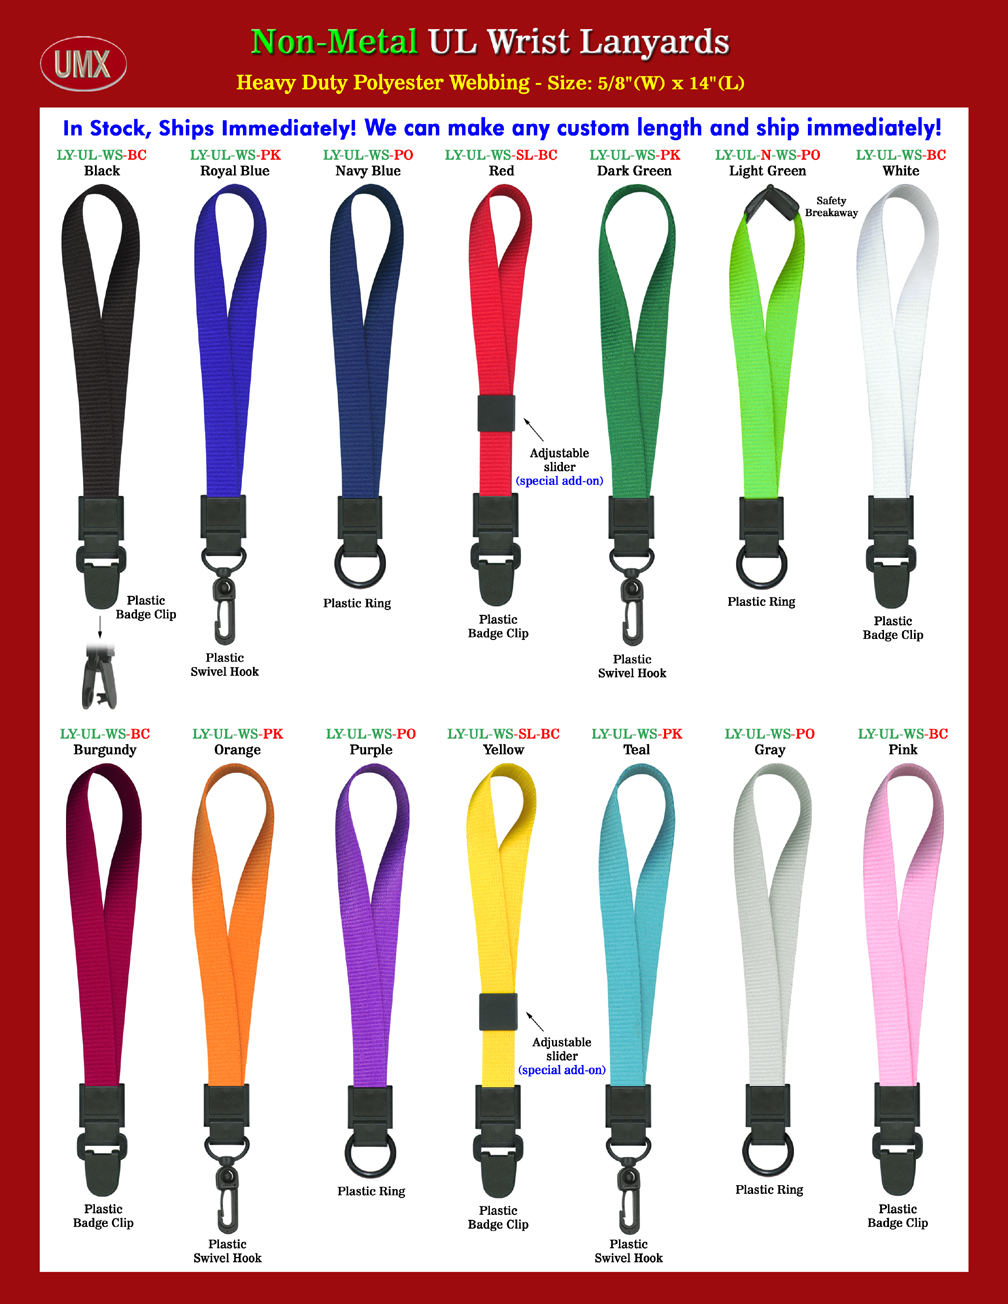 5/8" Heavy Duty All Plastic Plain Color Universal Link Wrist Lanyards - Scan-Safe Wrist Lanyards With 13-Colors In Stock.